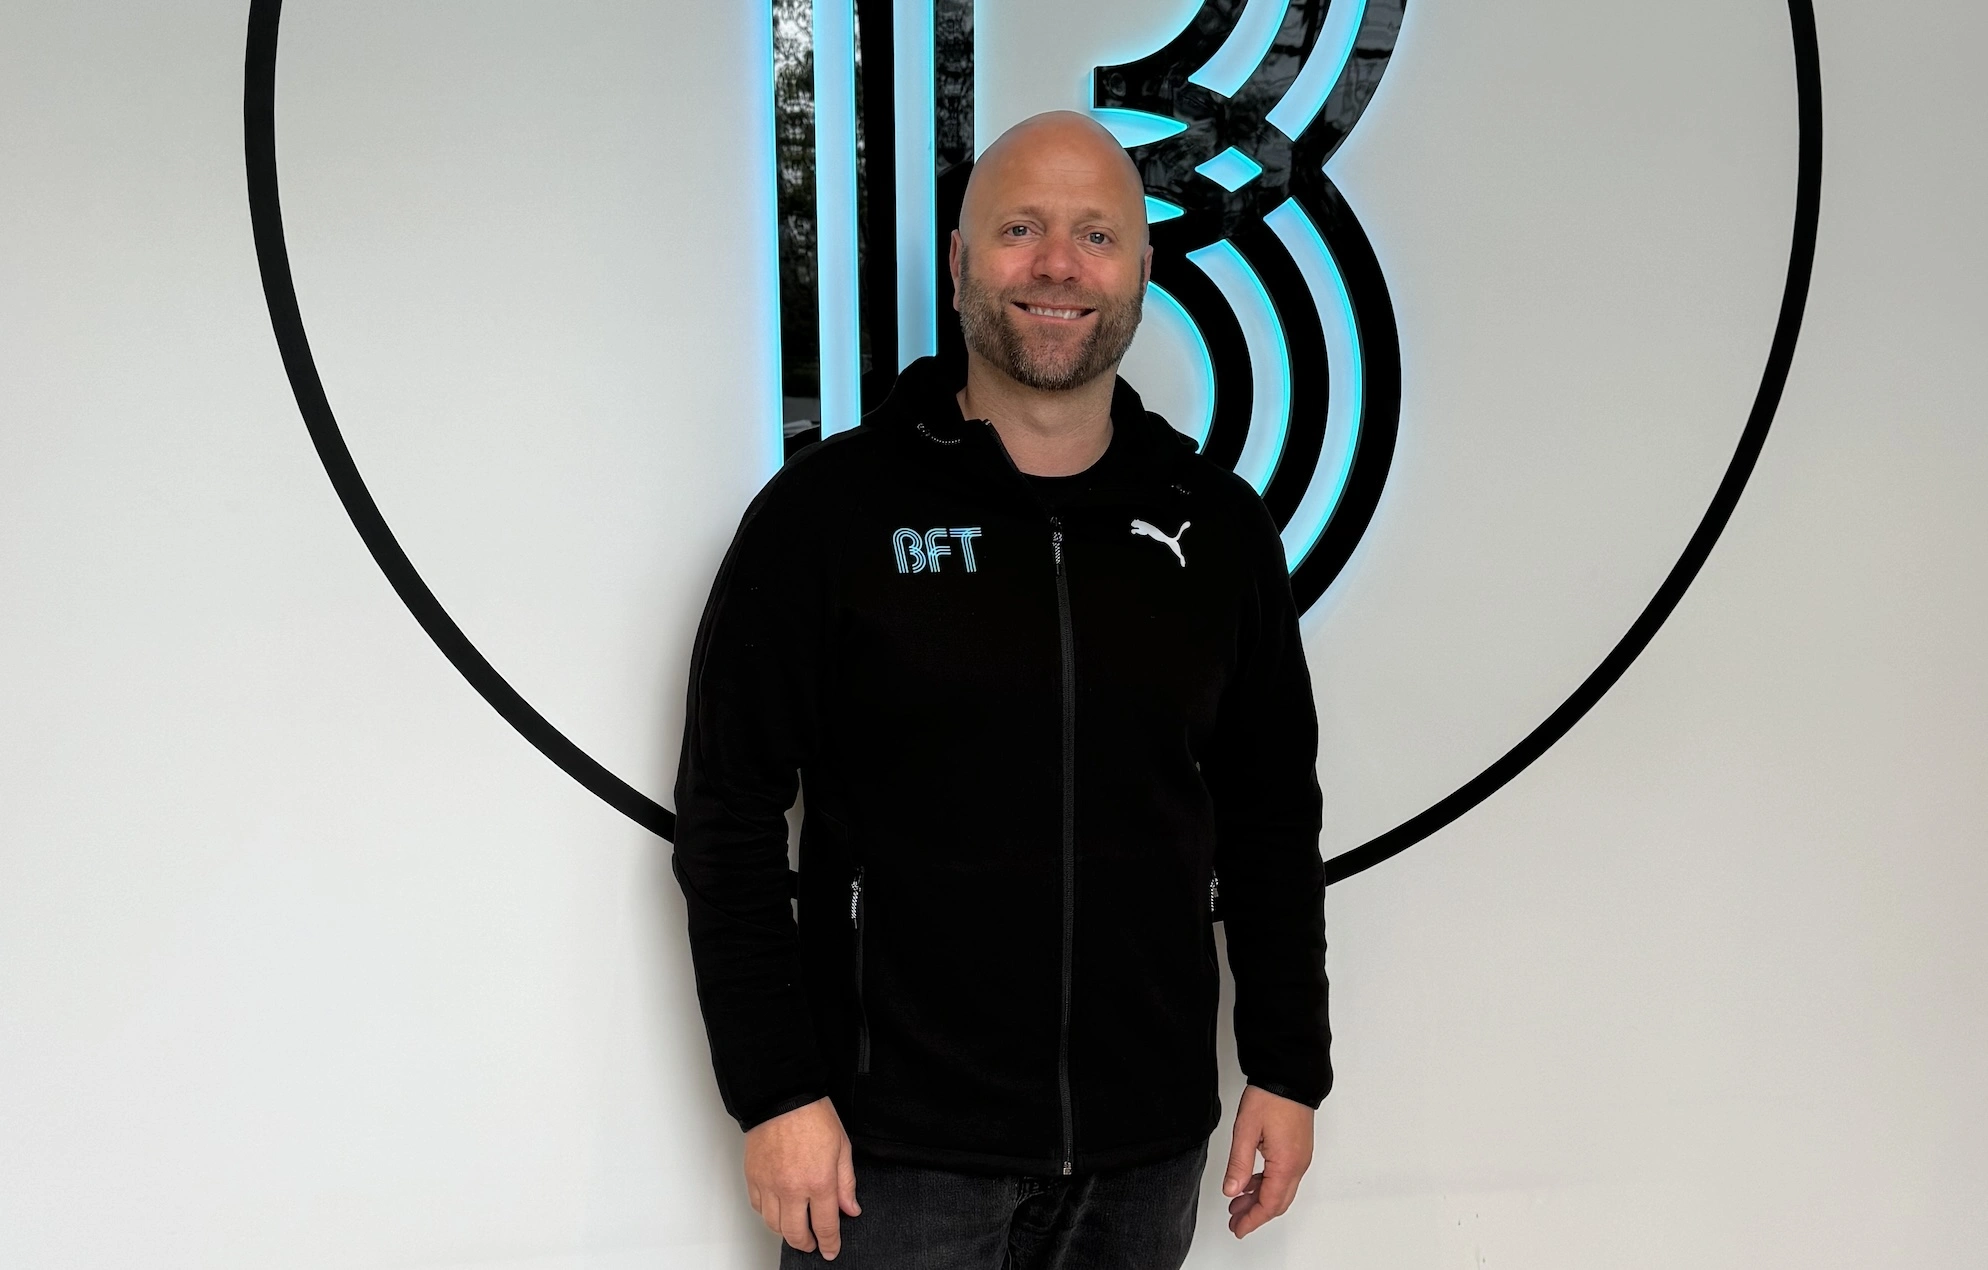 Master Franchisee Has High Hopes for BFT, ‘Back to Basics’ Fitness in Europe